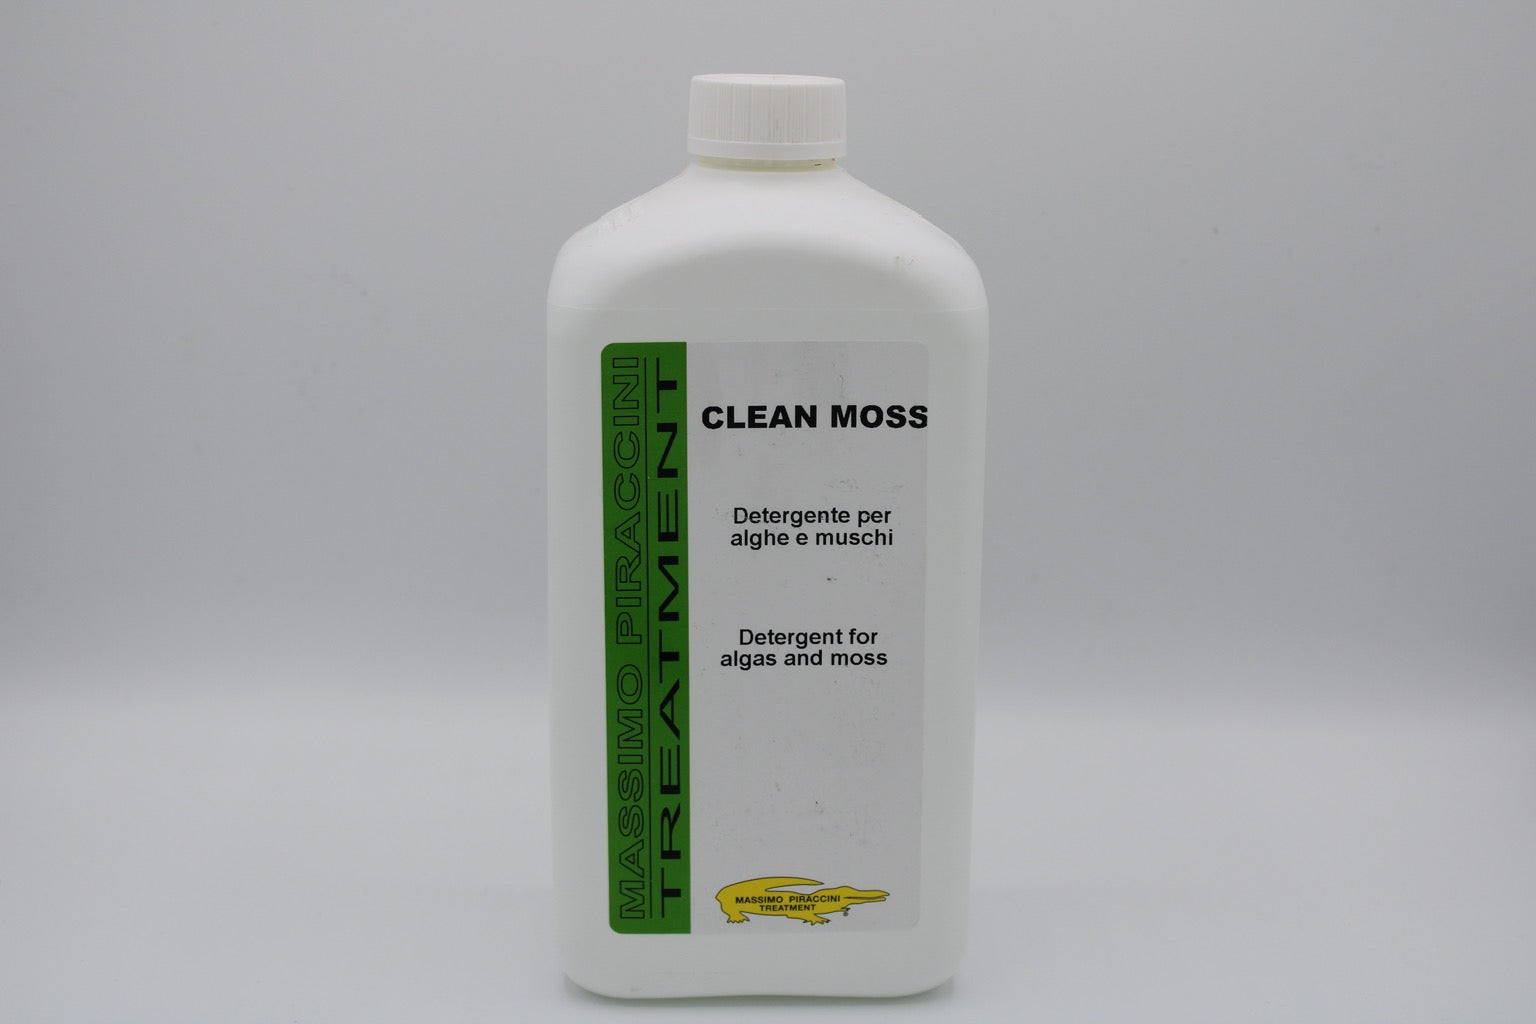 CLEAN MOSS - Cleaner for algae and moss